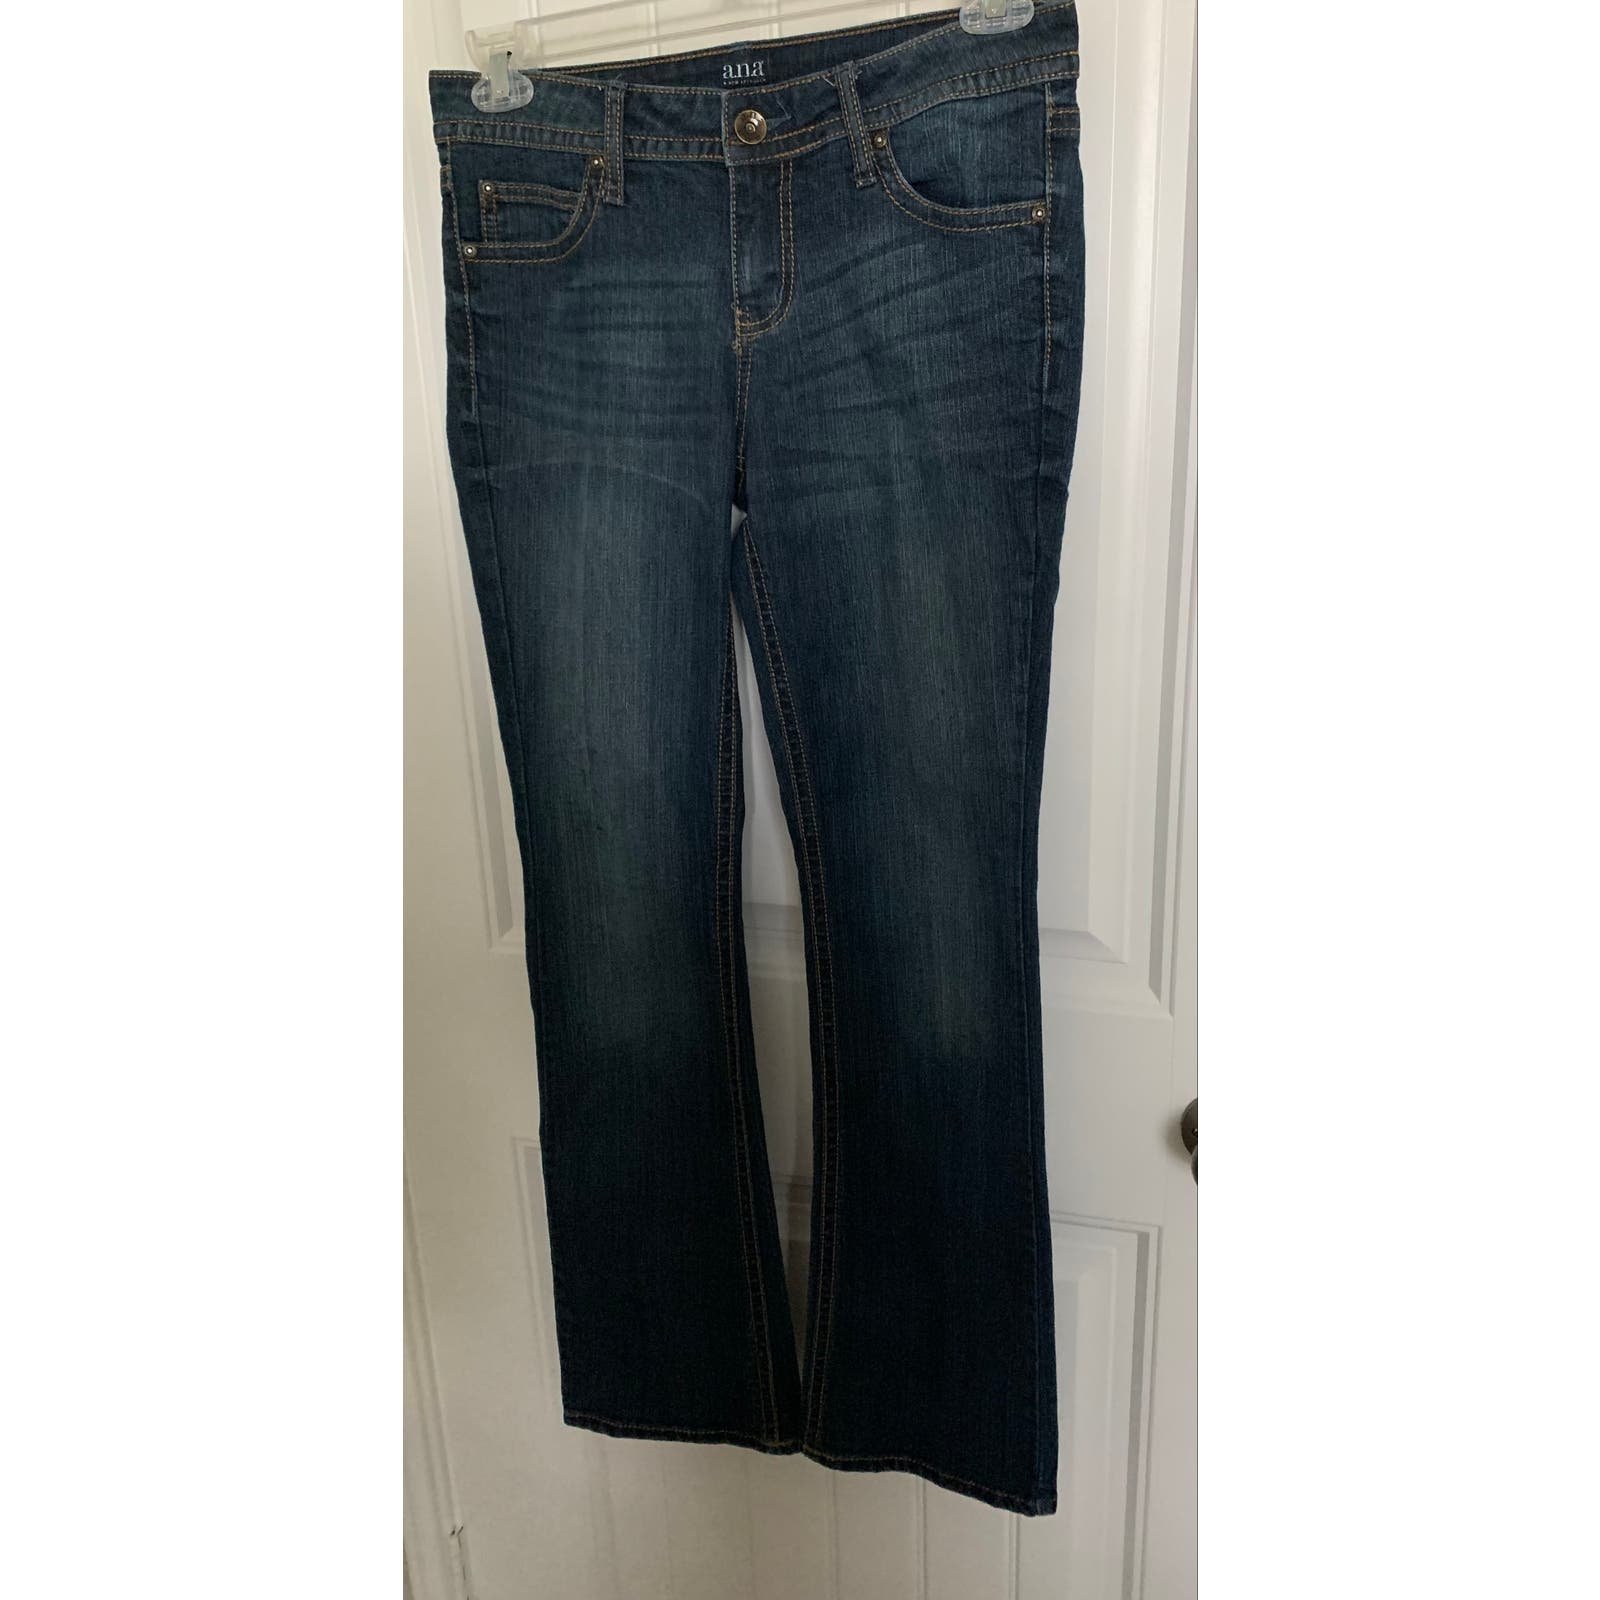 Great A.N.A MID RISE BOOTCUT JEANS WOMENS, 29 / 8, BLUE